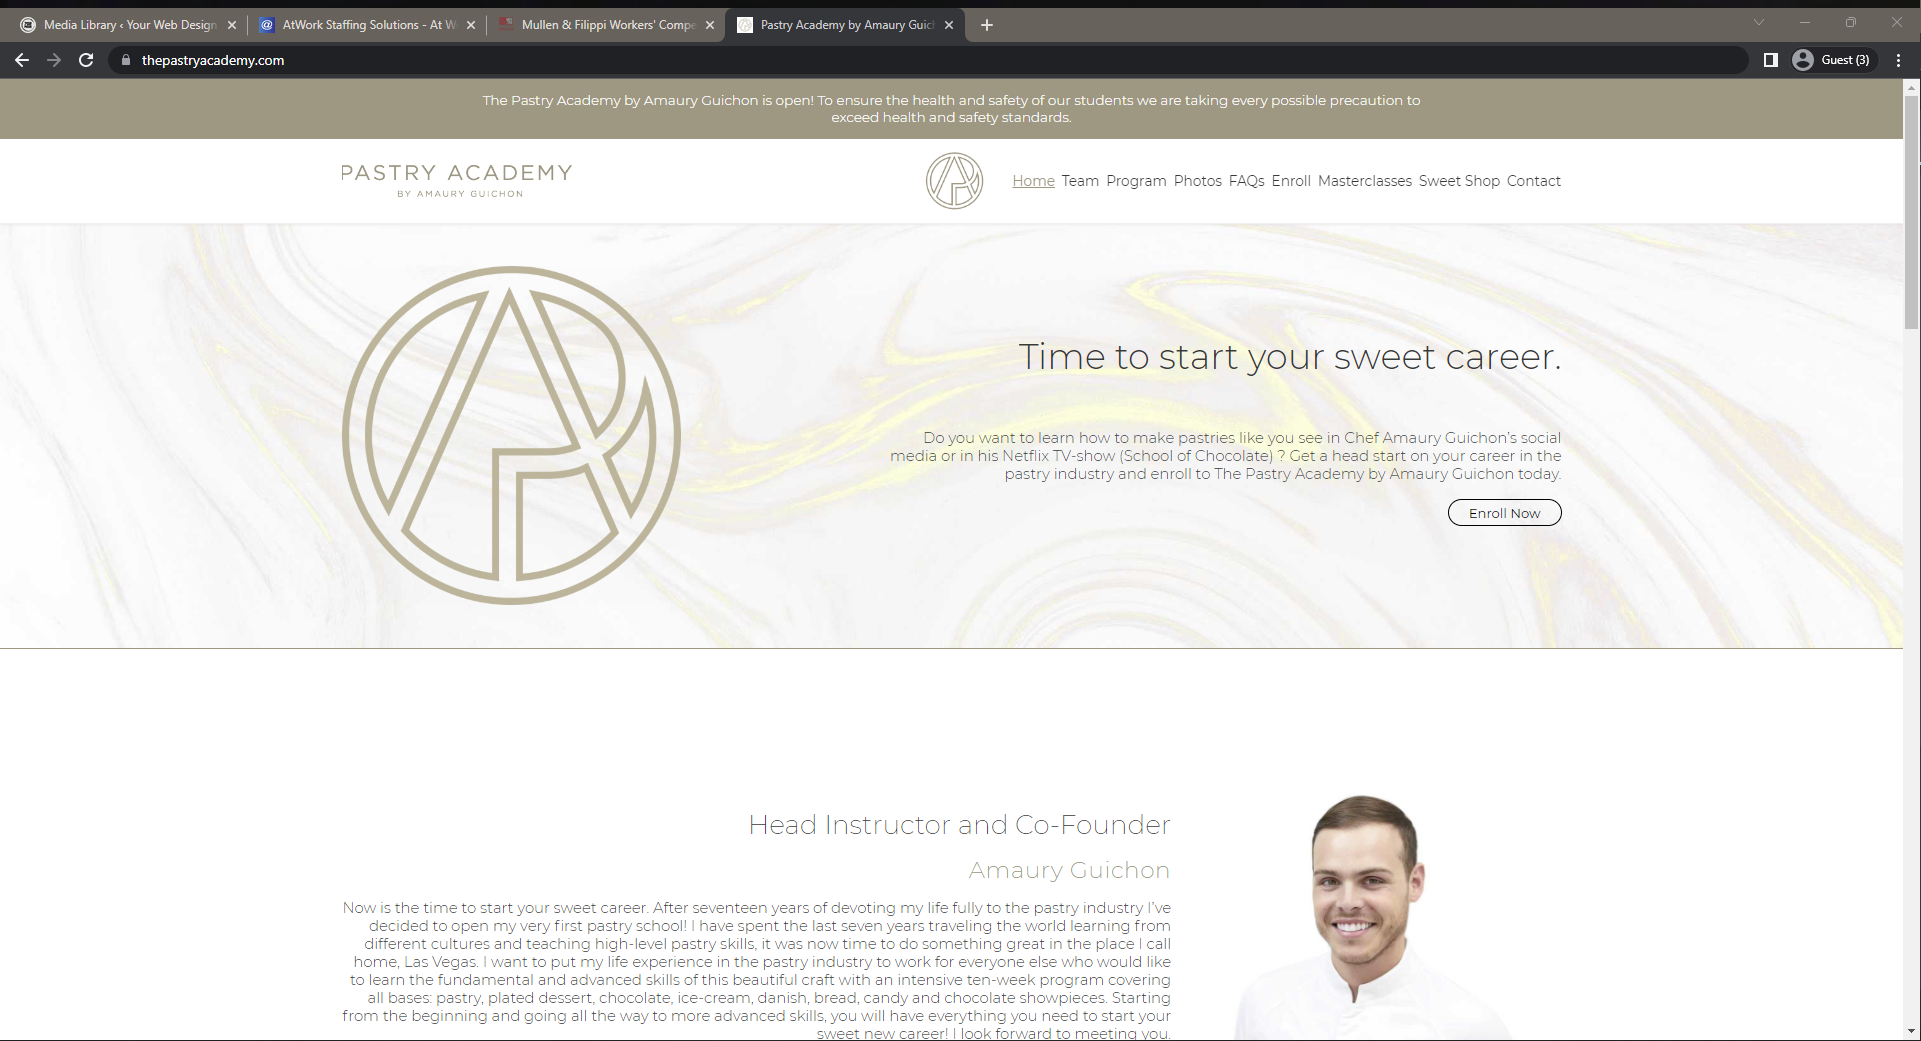 The Pastry Academy Website Design by 702 Pros - WordPress Support and Maintenance West Palm Beach, FL